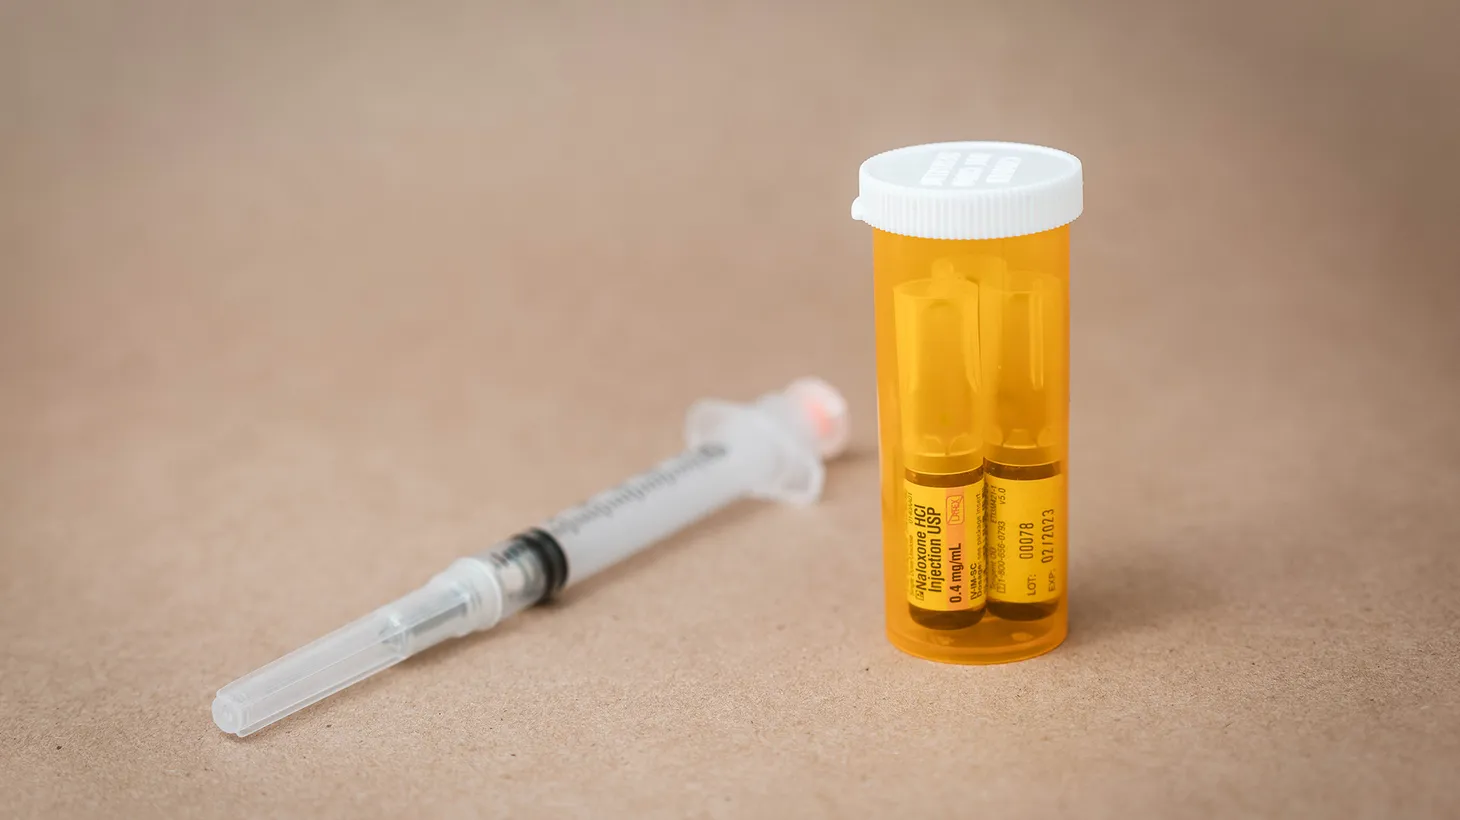 Vials of Naloxone, used by places like the now-closed Harm Reduction Institute to help people with heroin addiction, are seen with a syringe.